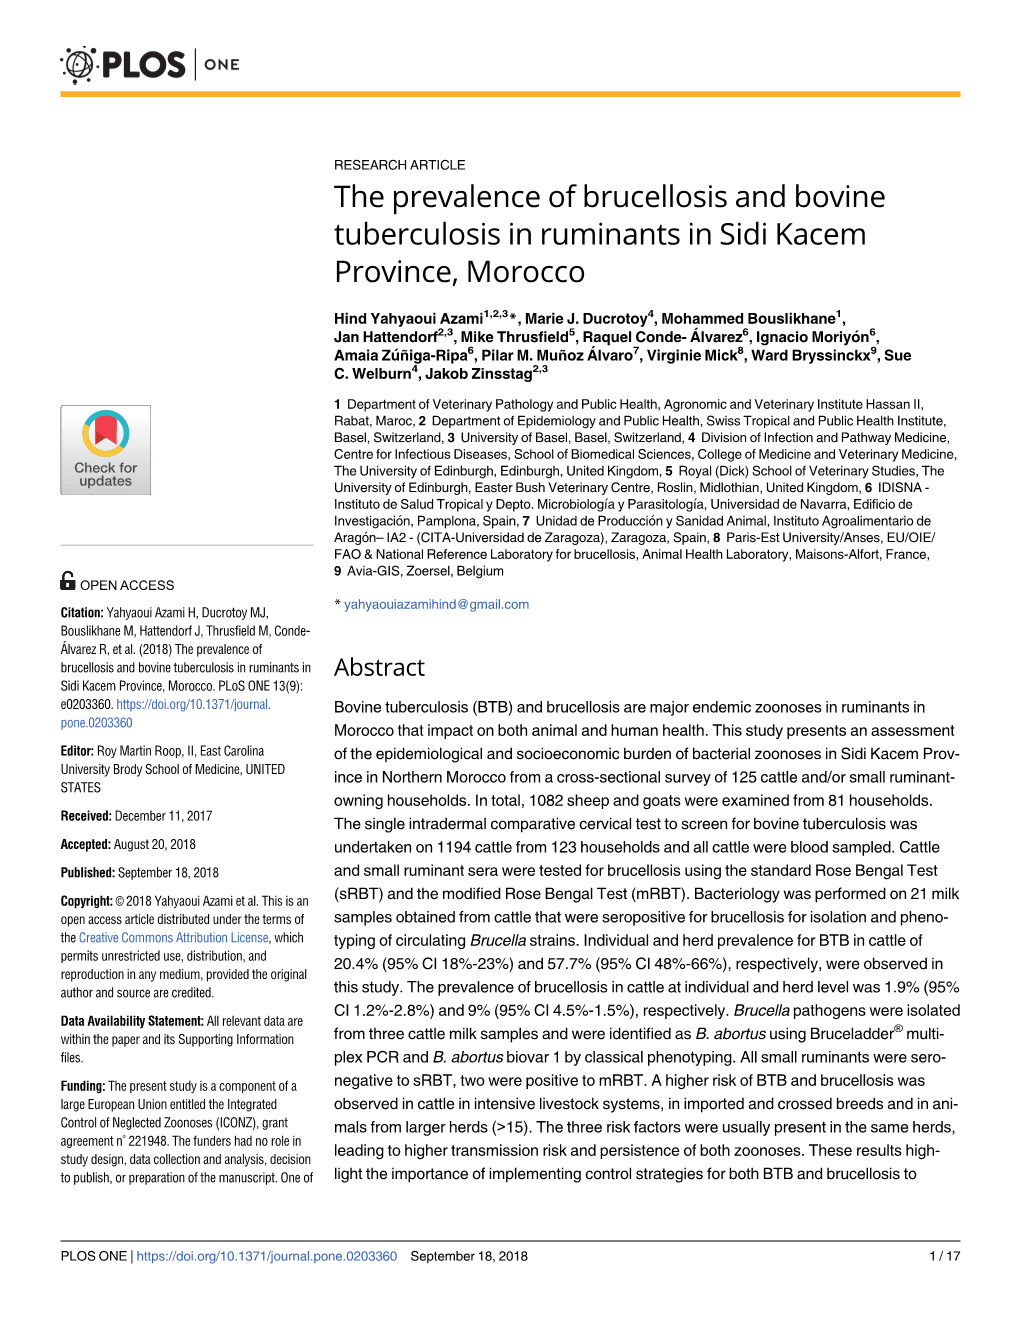 The Prevalence of Brucellosis and Bovine Tuberculosis in Ruminants in Sidi Kacem Province, Morocco